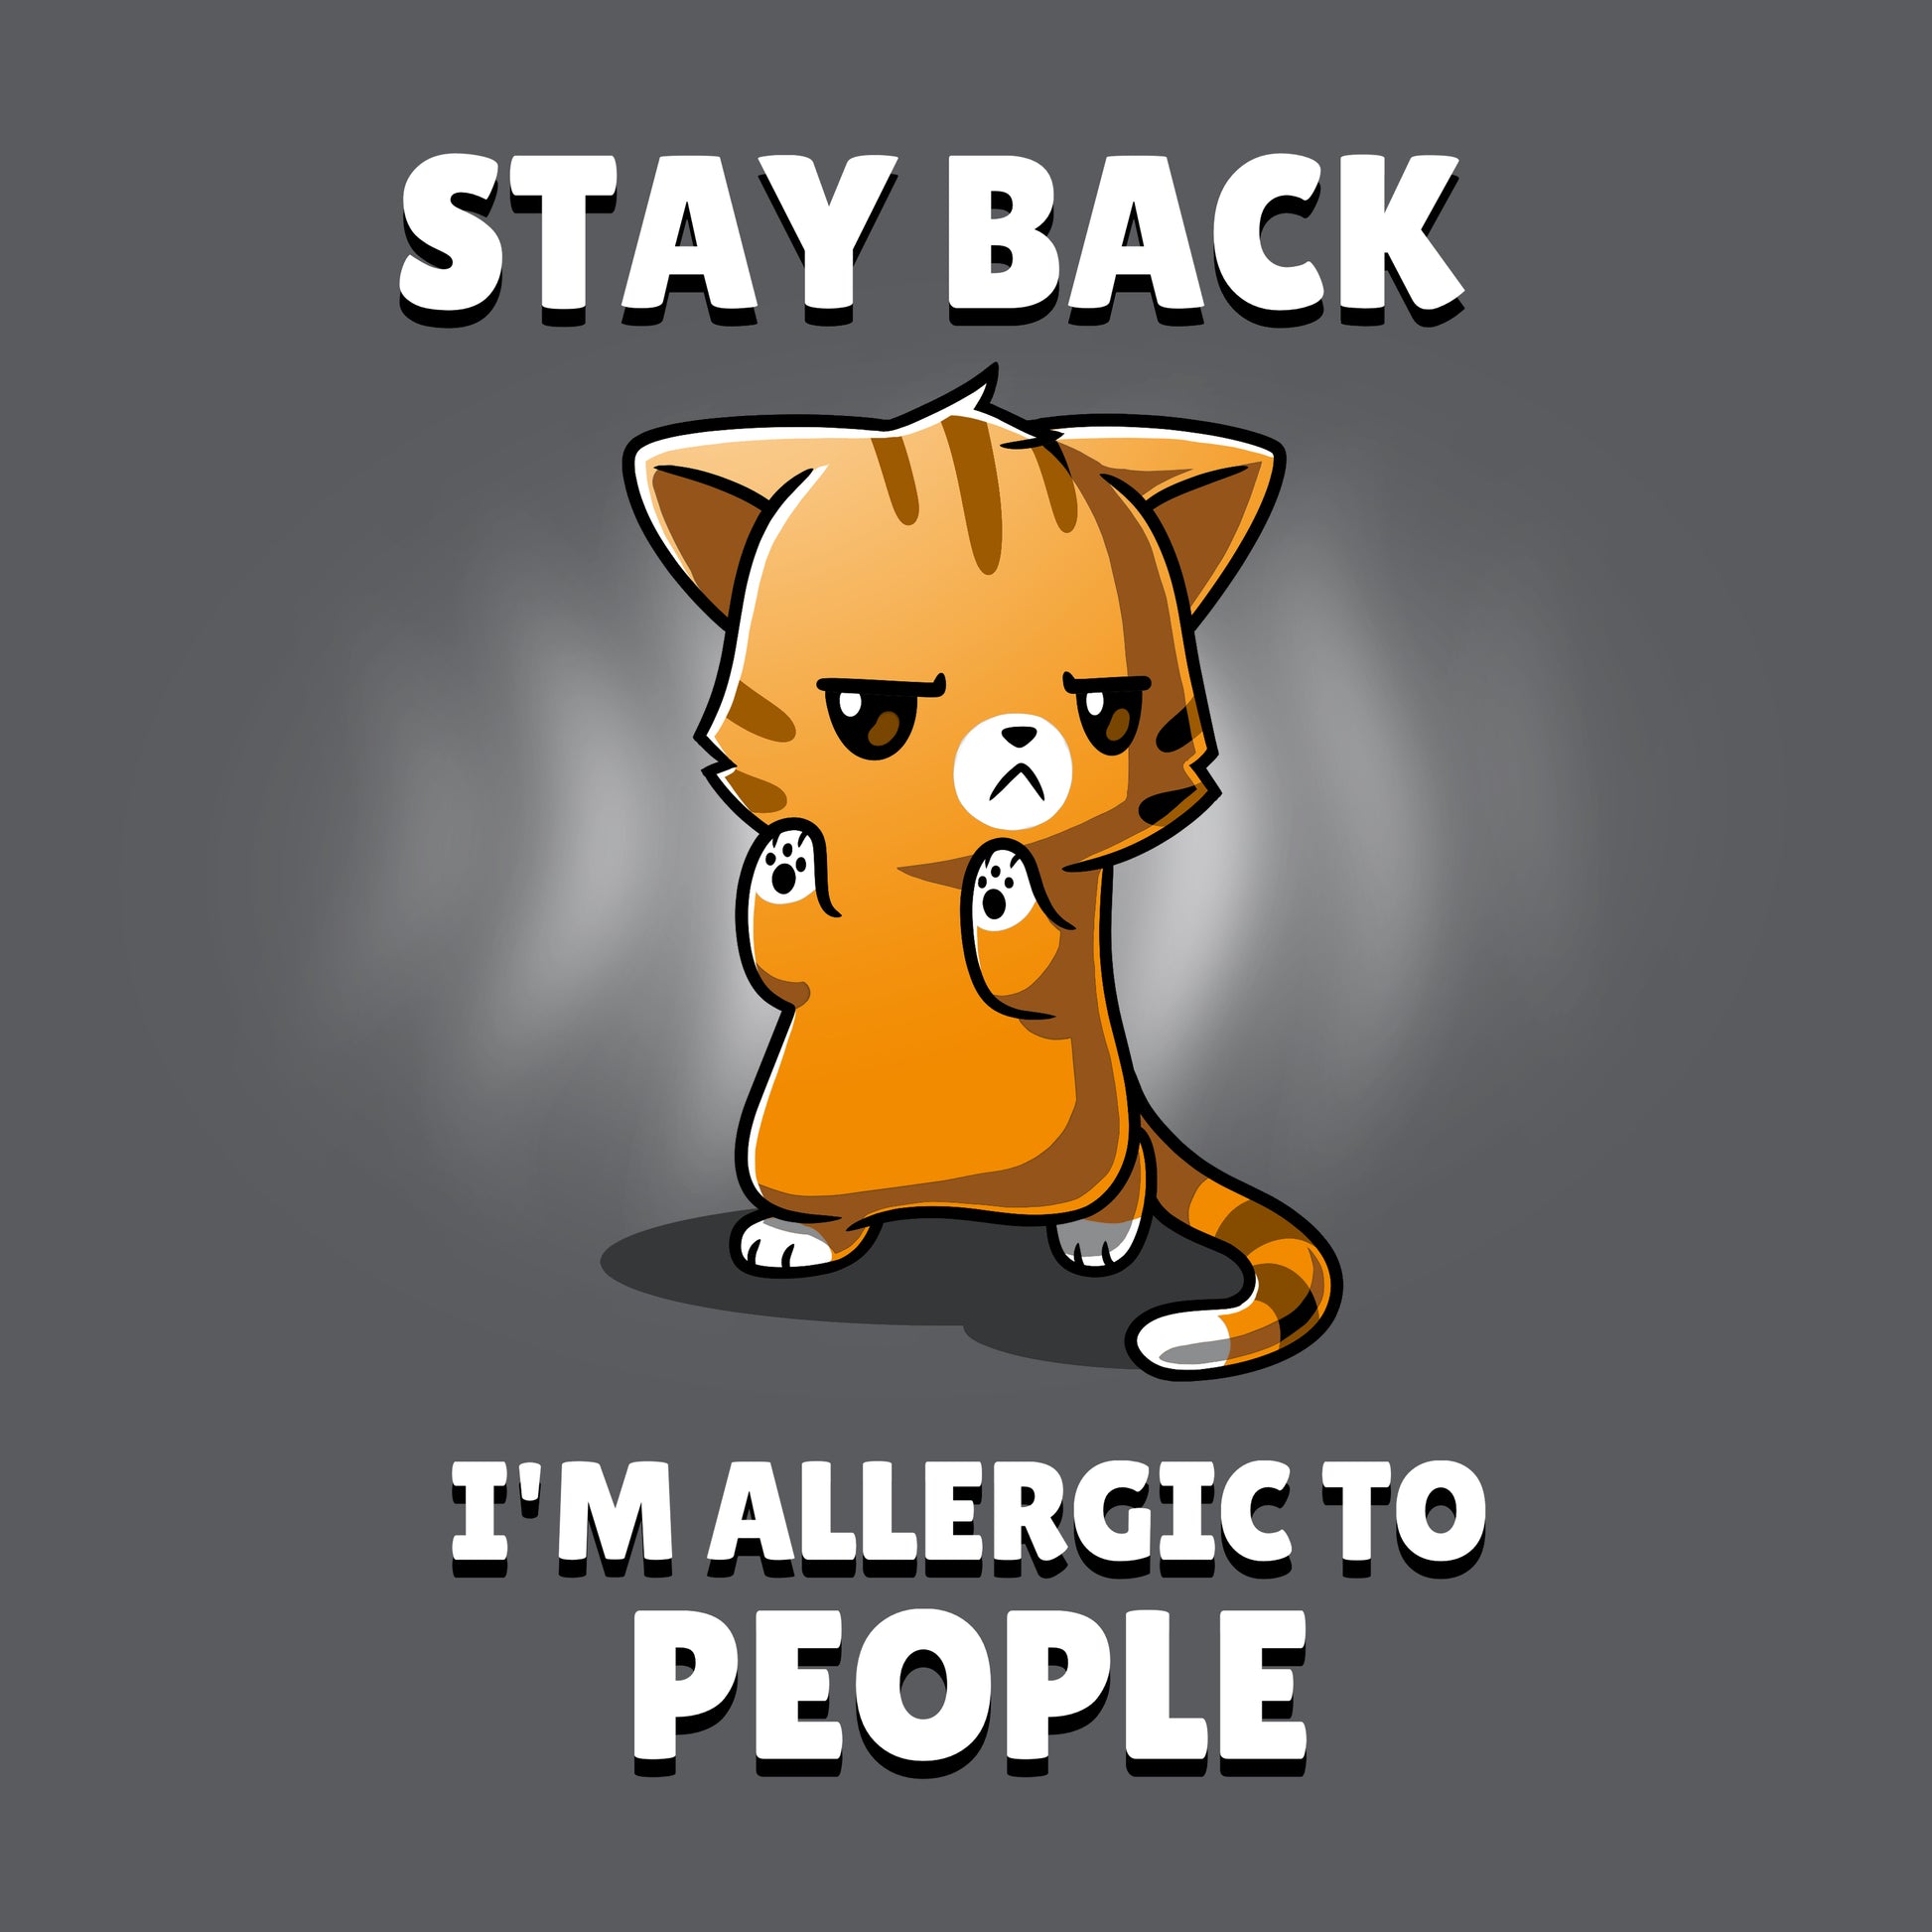 Stay back, I'm allergic to people. -> Stay back, I'm allergic to TeeTurtle's "I'm Allergic to People.